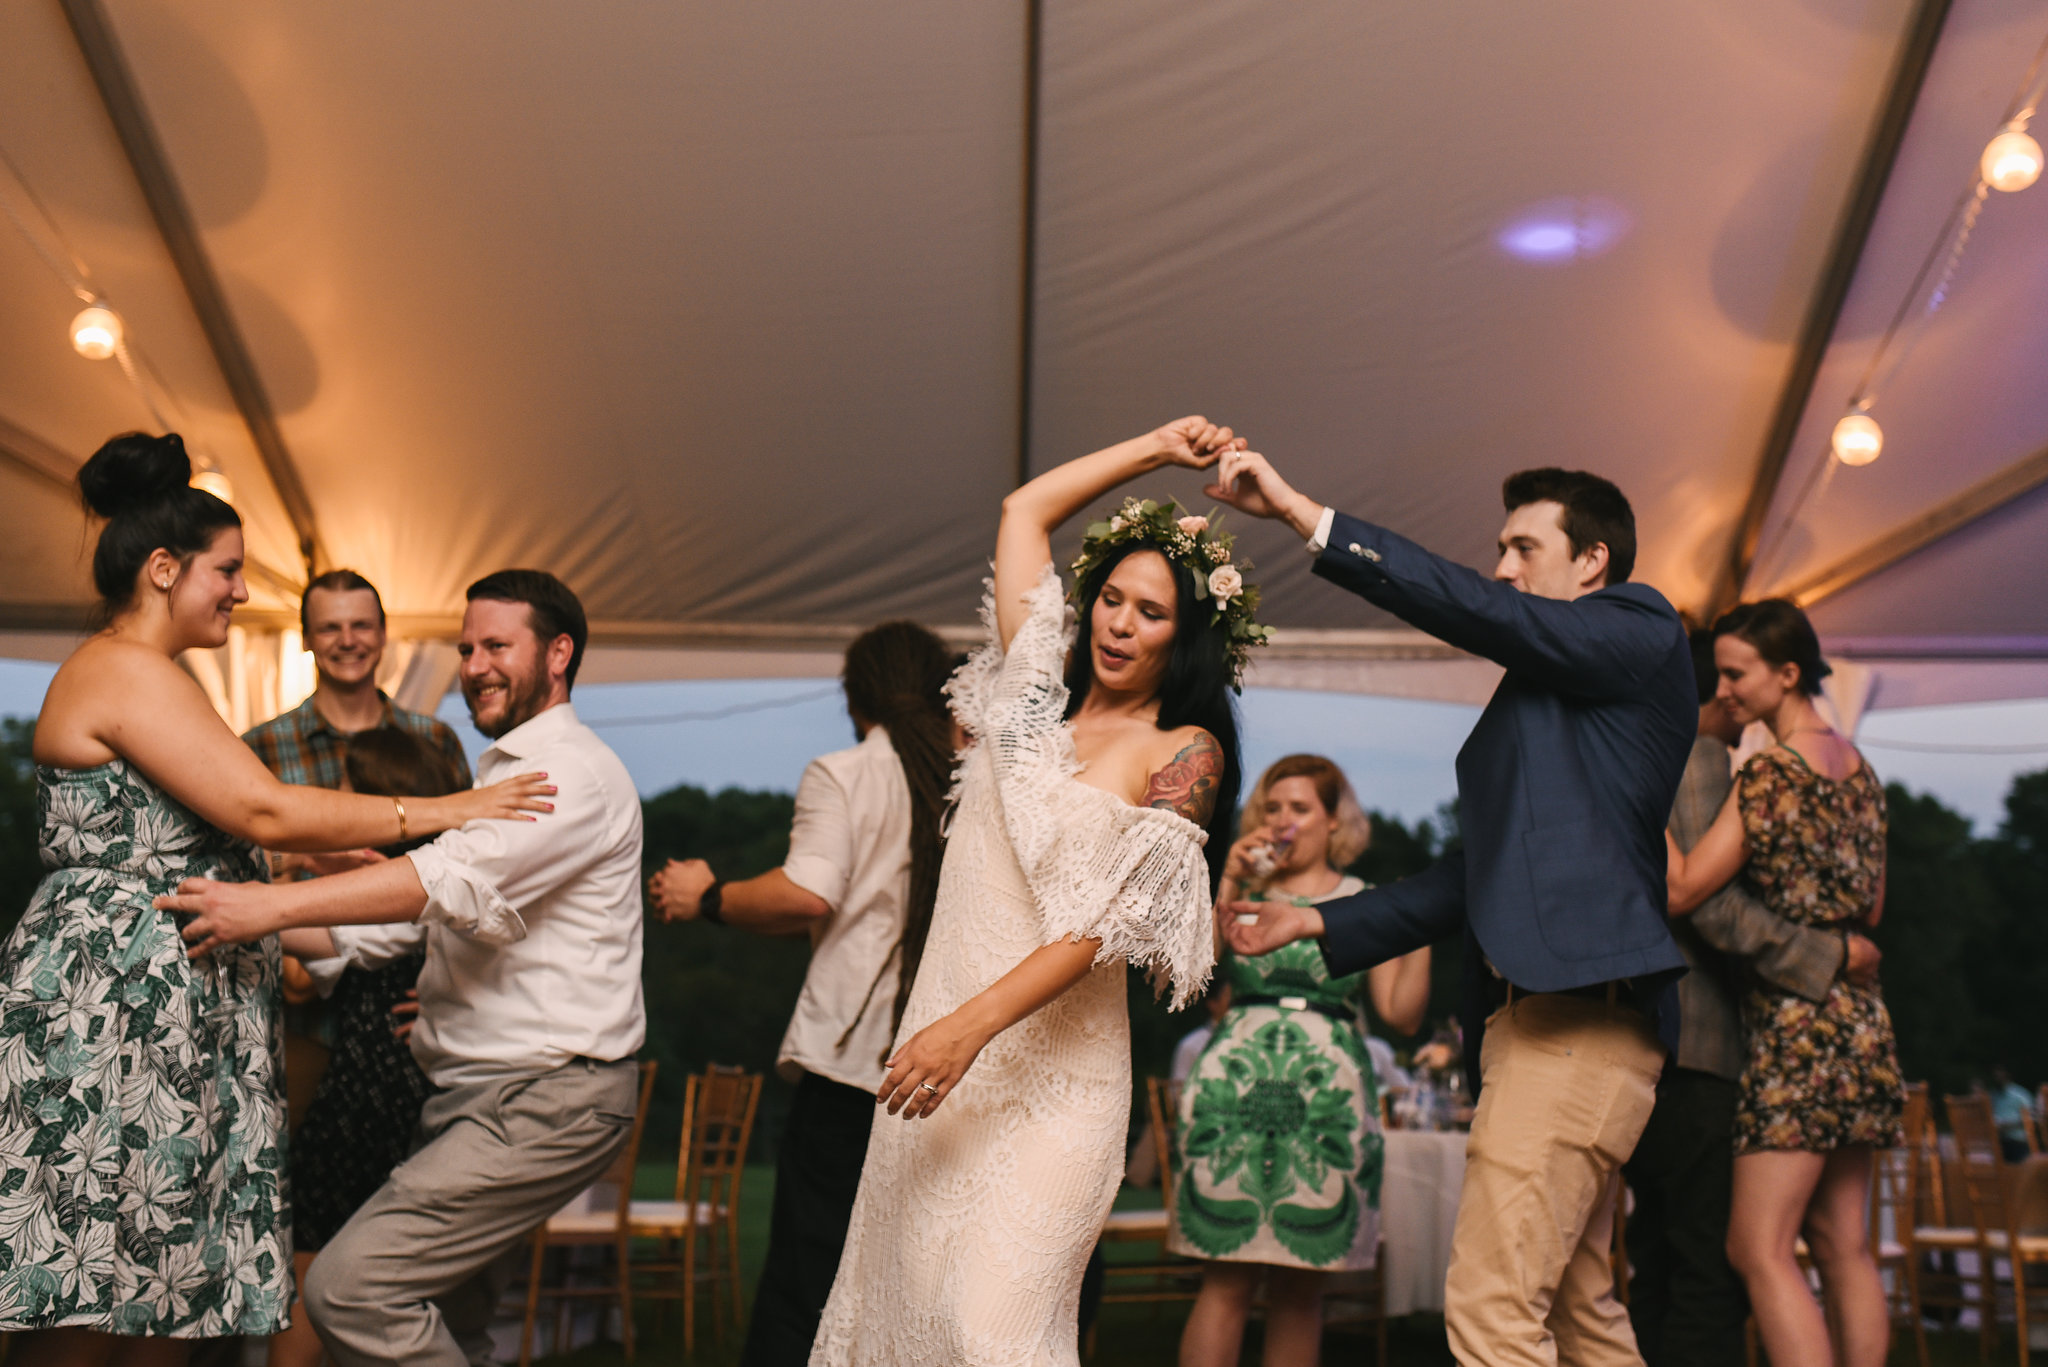  Maryland, Eastern Shore, Baltimore Wedding Photographer, Romantic, Boho, Backyard Wedding, Nature, Bride and Groom Dancing at Reception, Guests Dancing, Flower Crown 